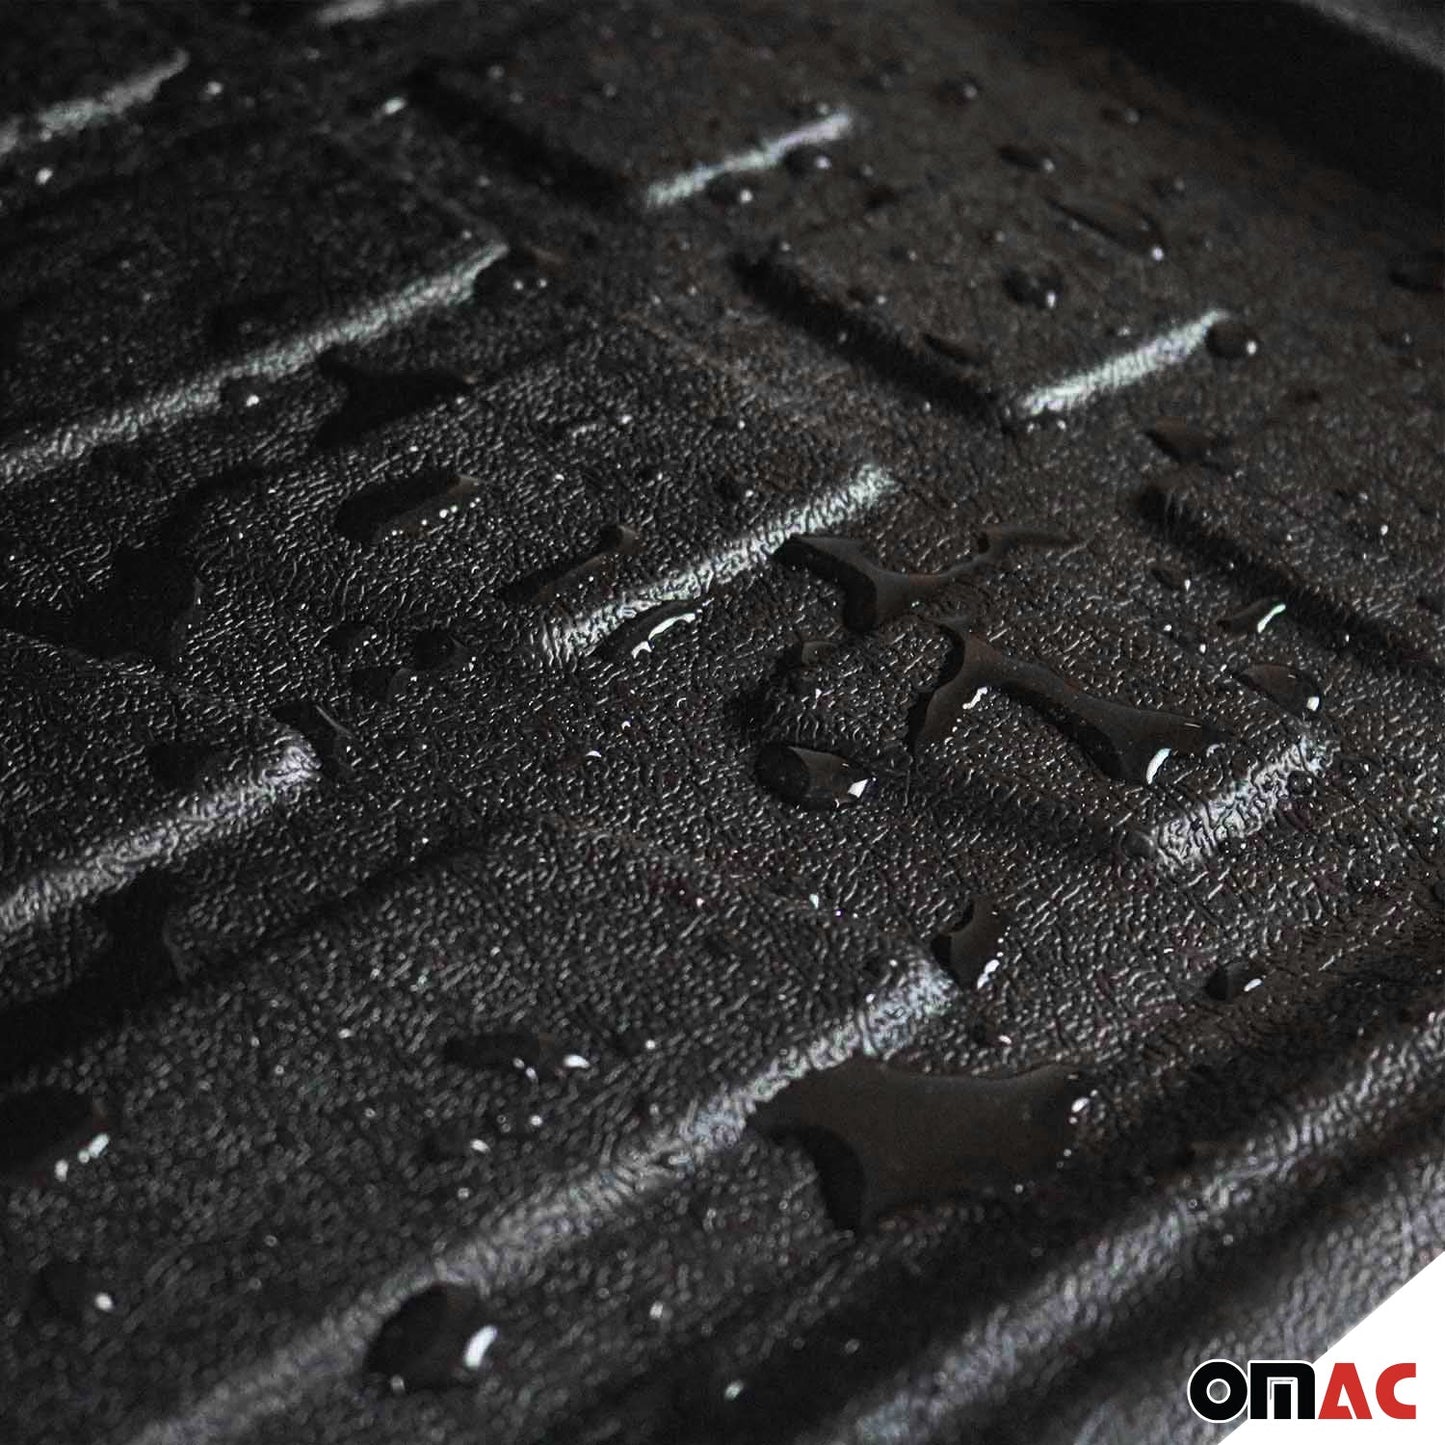 OMAC OMAC Cargo Mats Liner for Toyota Land Cruiser 100 1998-2007 All-Weather TPE 7042YPS250